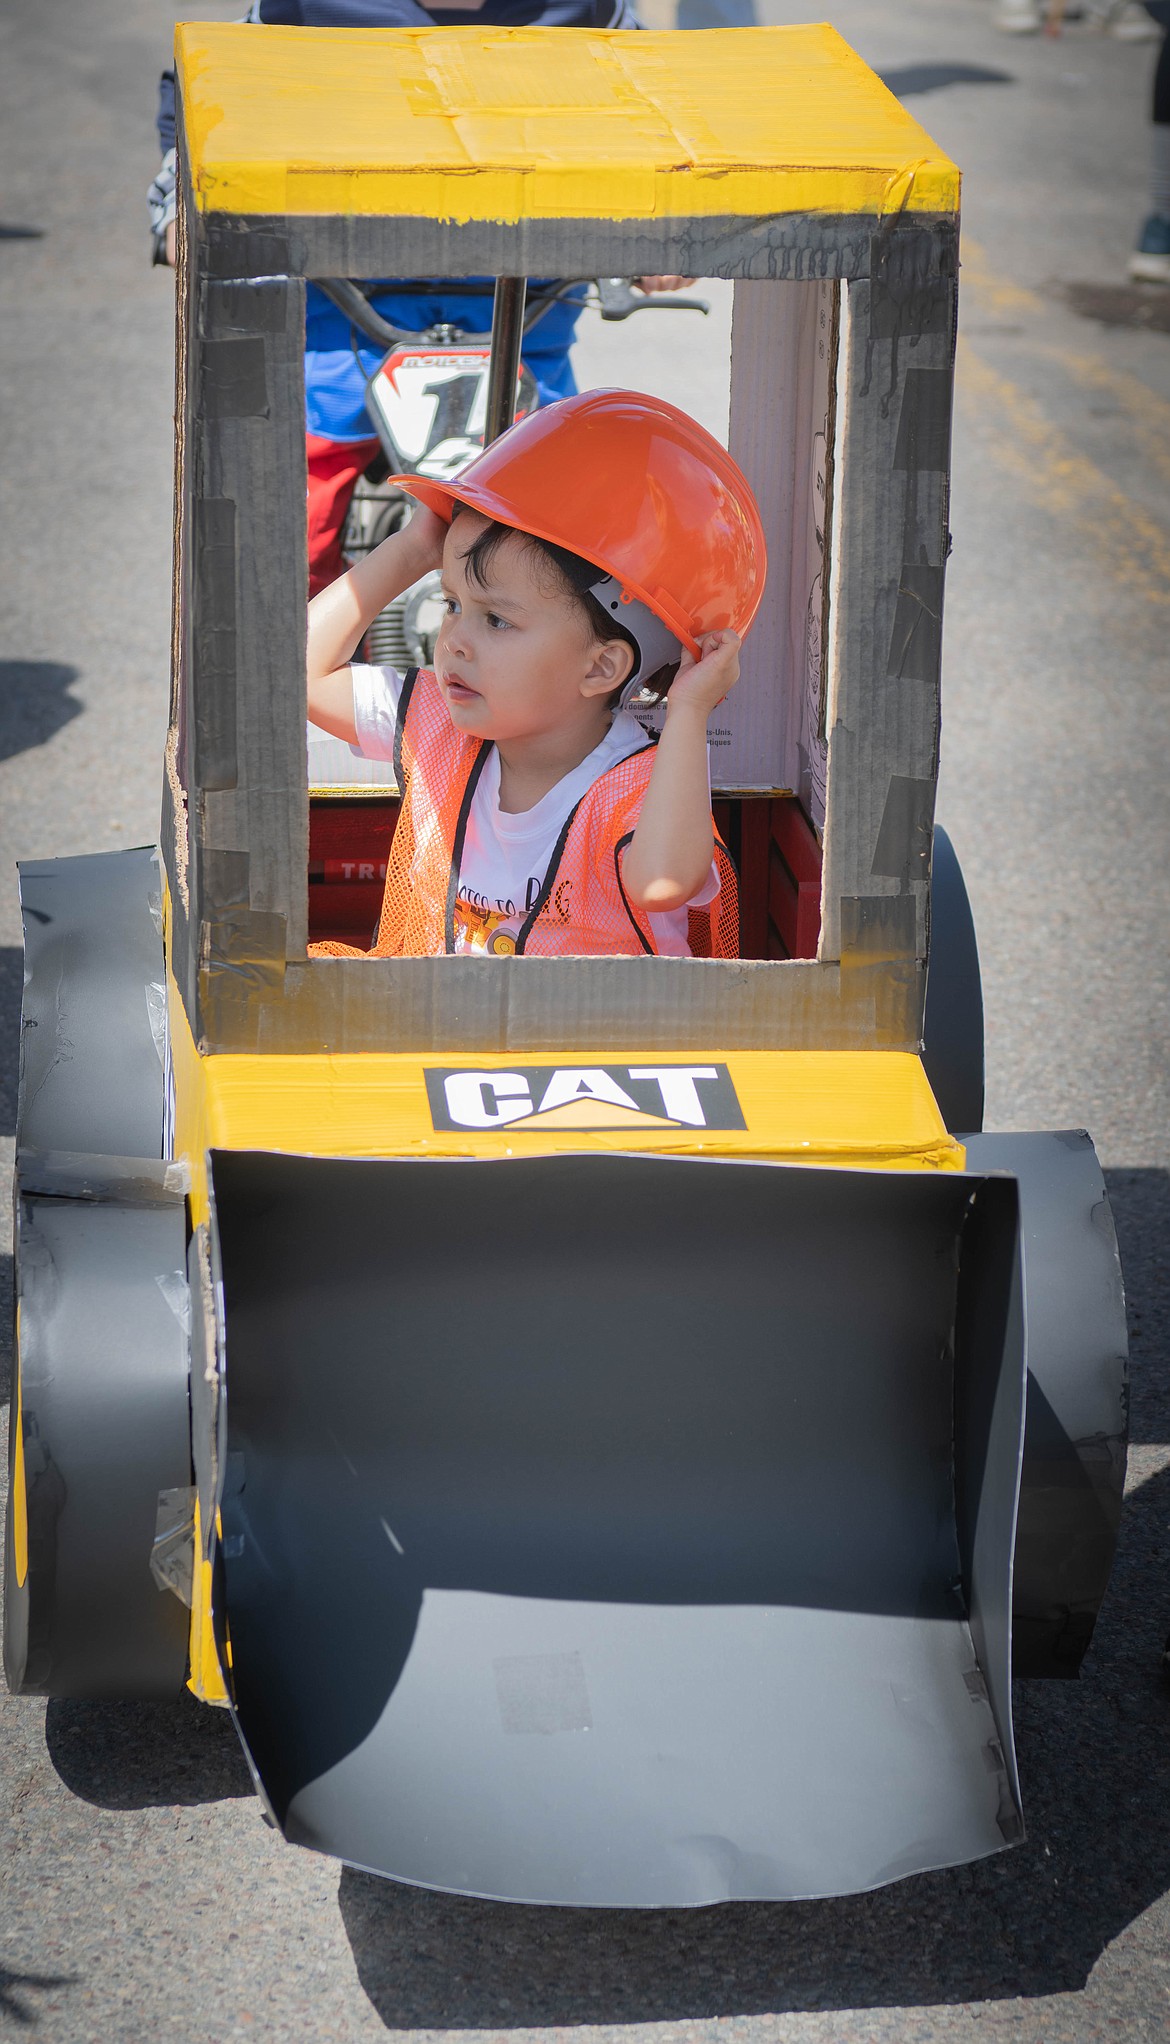 Thomas Bras, 2, from Lone Pine won the vehicle category in the Kiddie Parade. (Tracy Scott/Valley Press)